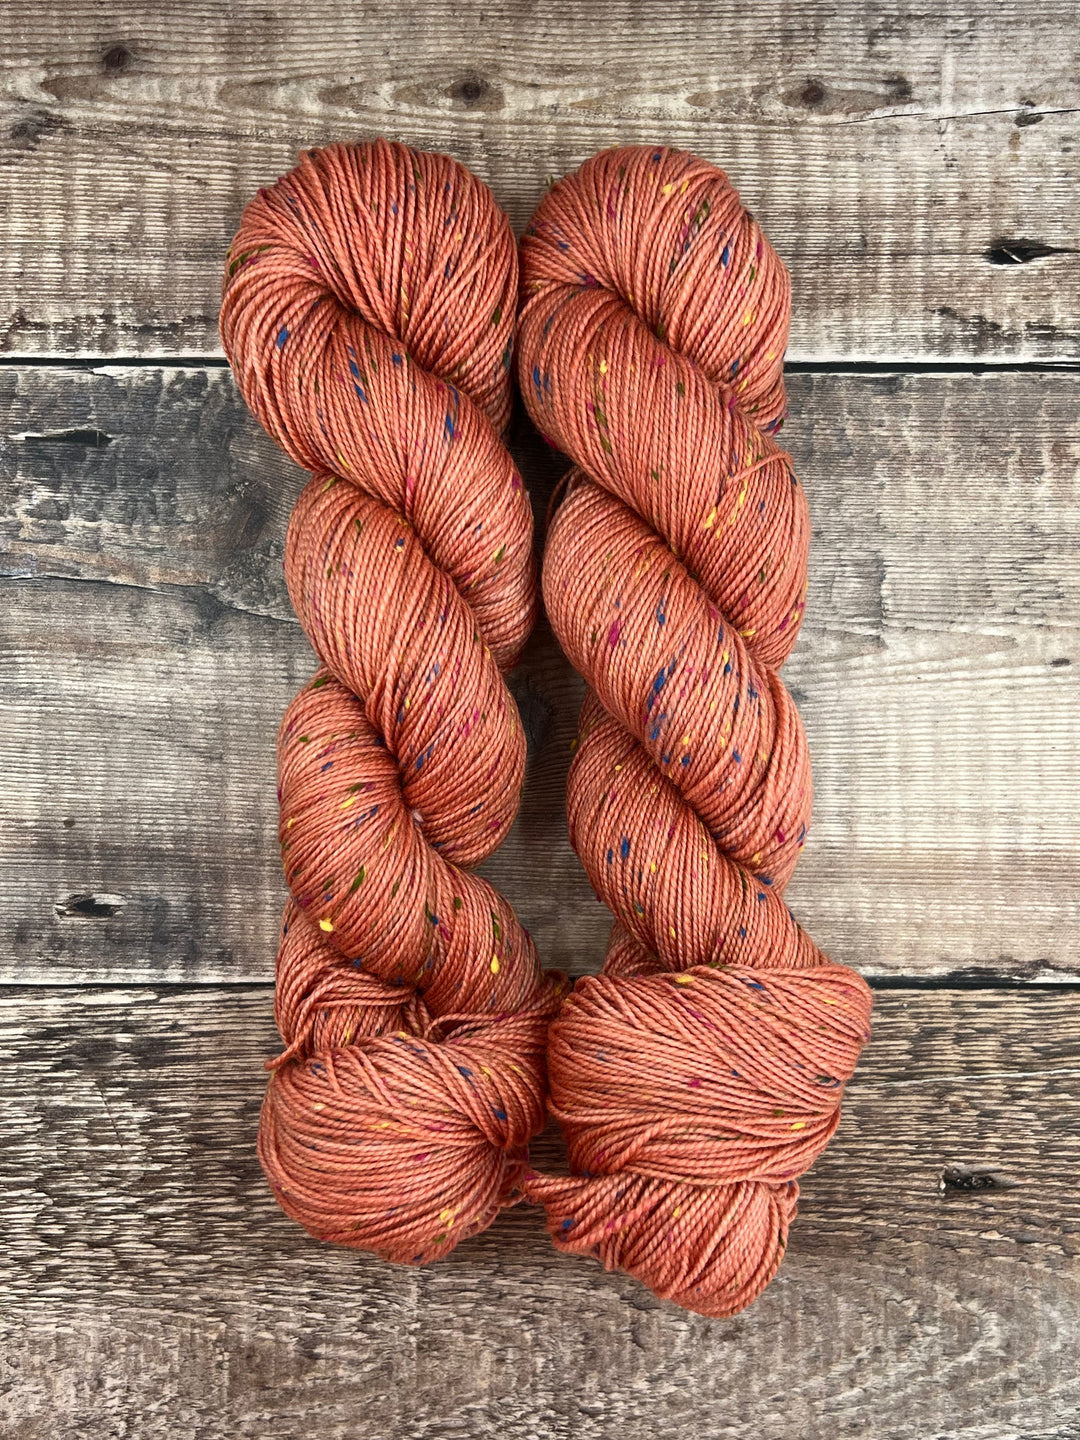 DÚN NA NGALL MULTI 4PLY: PEACH ORCHARD